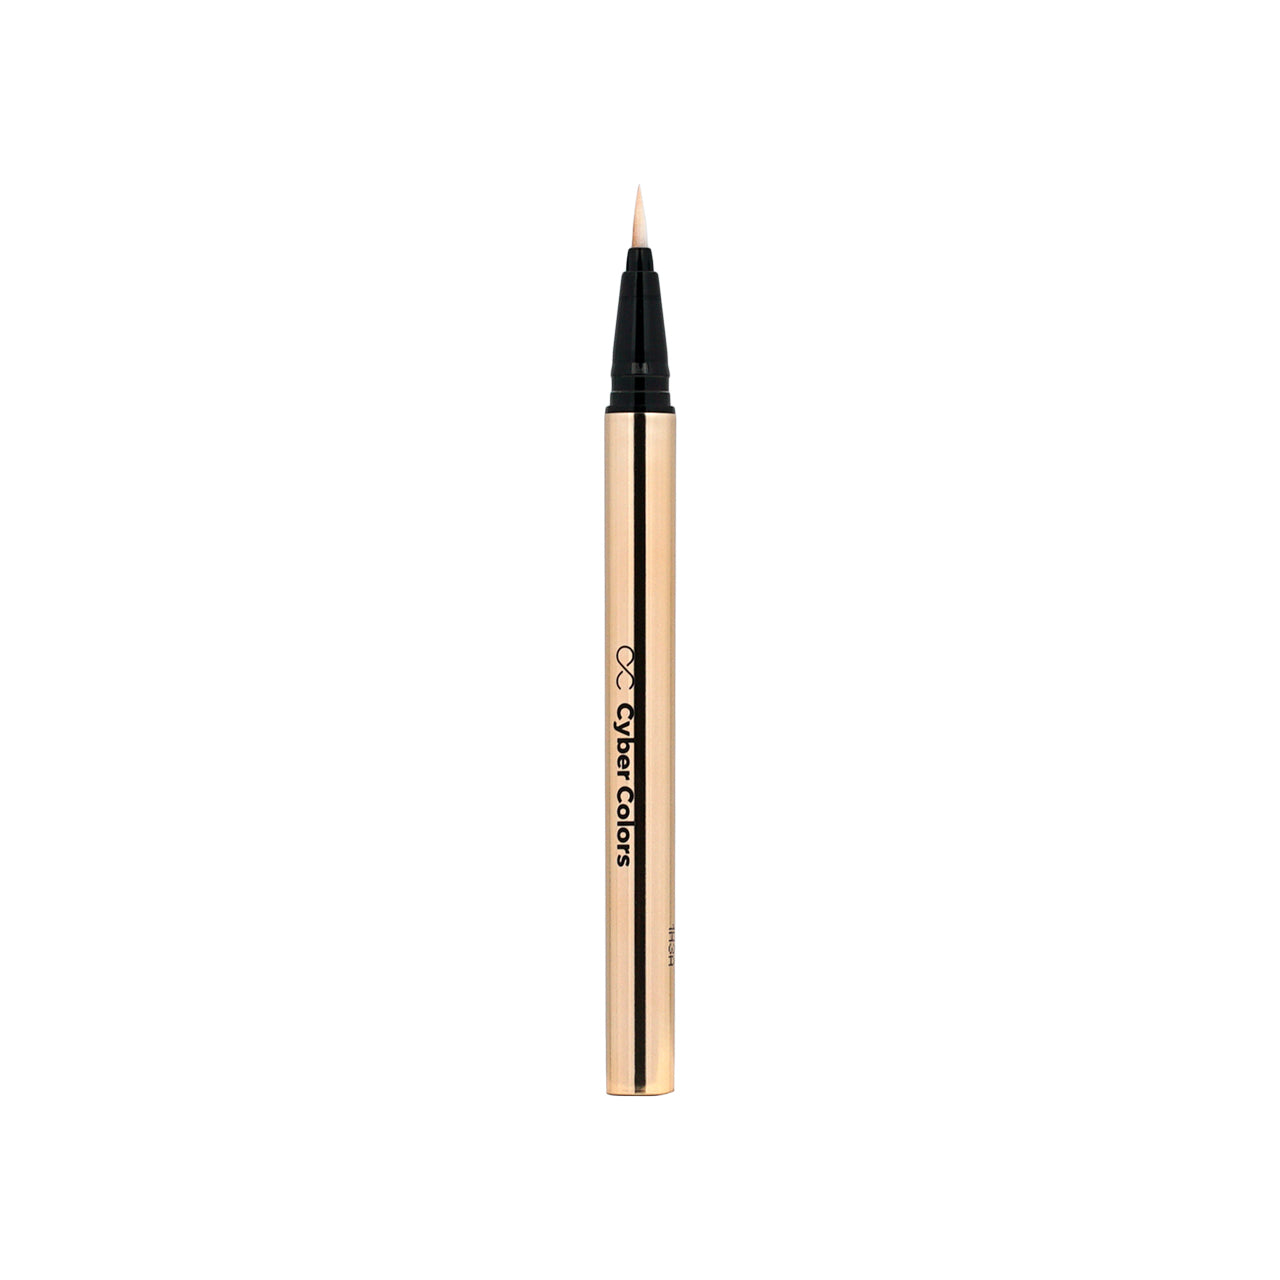 Cyber Colors Bright Eyes Liner #03 Champagne Gold 0.5g - Sasa Global eShop